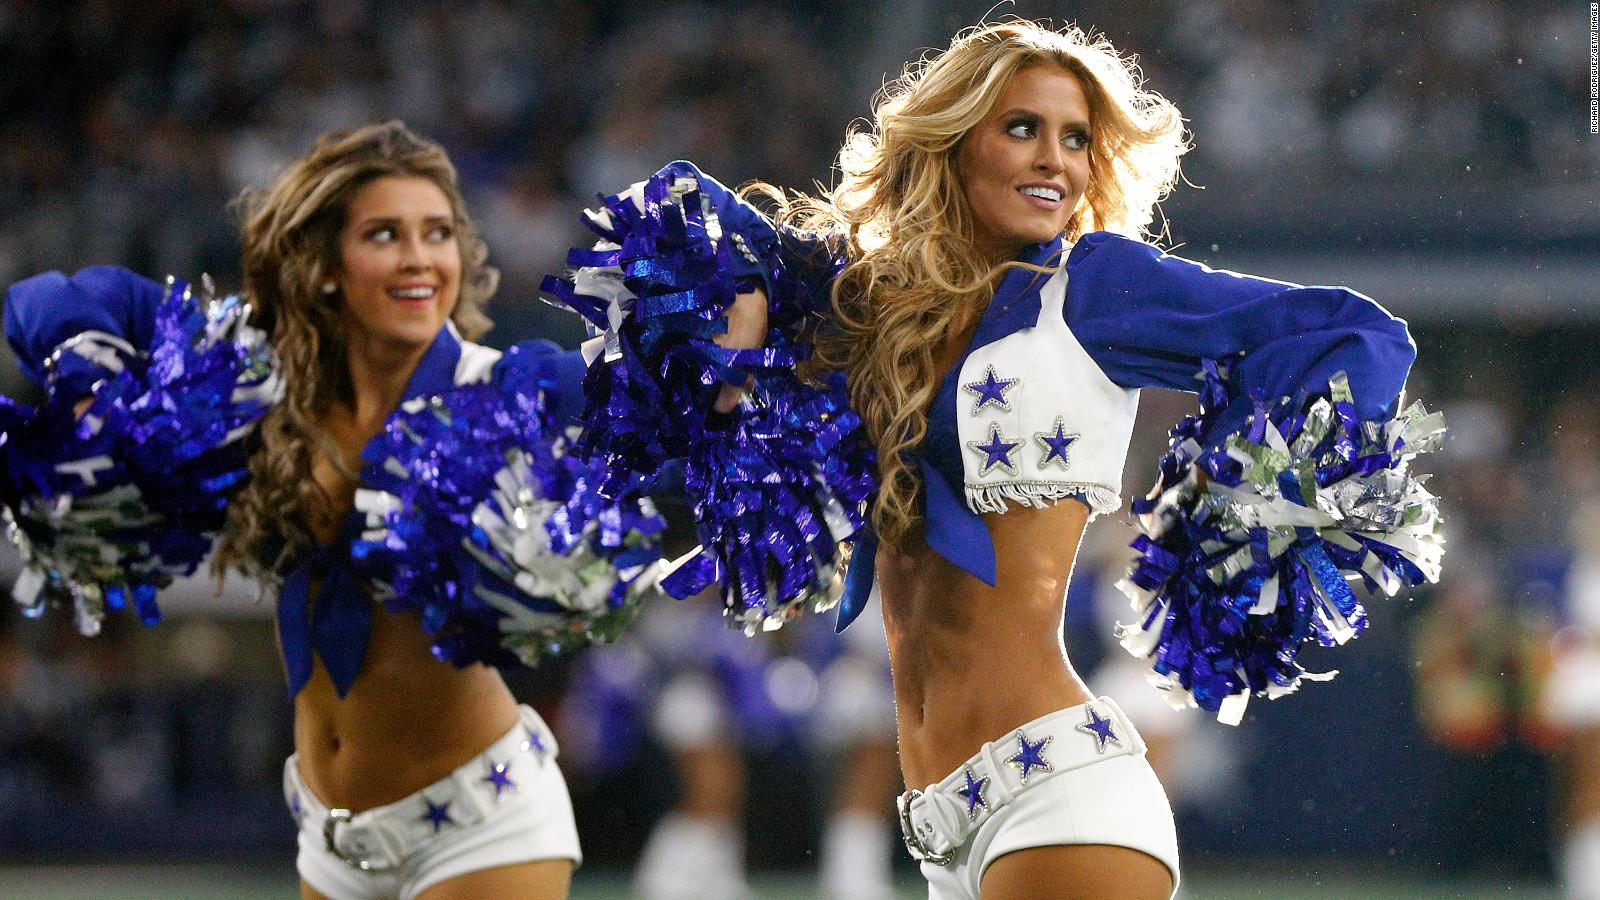 NFL cheer uniforms have been scrutinized since the 1970s, but critics might  be missing the point - CNN Style